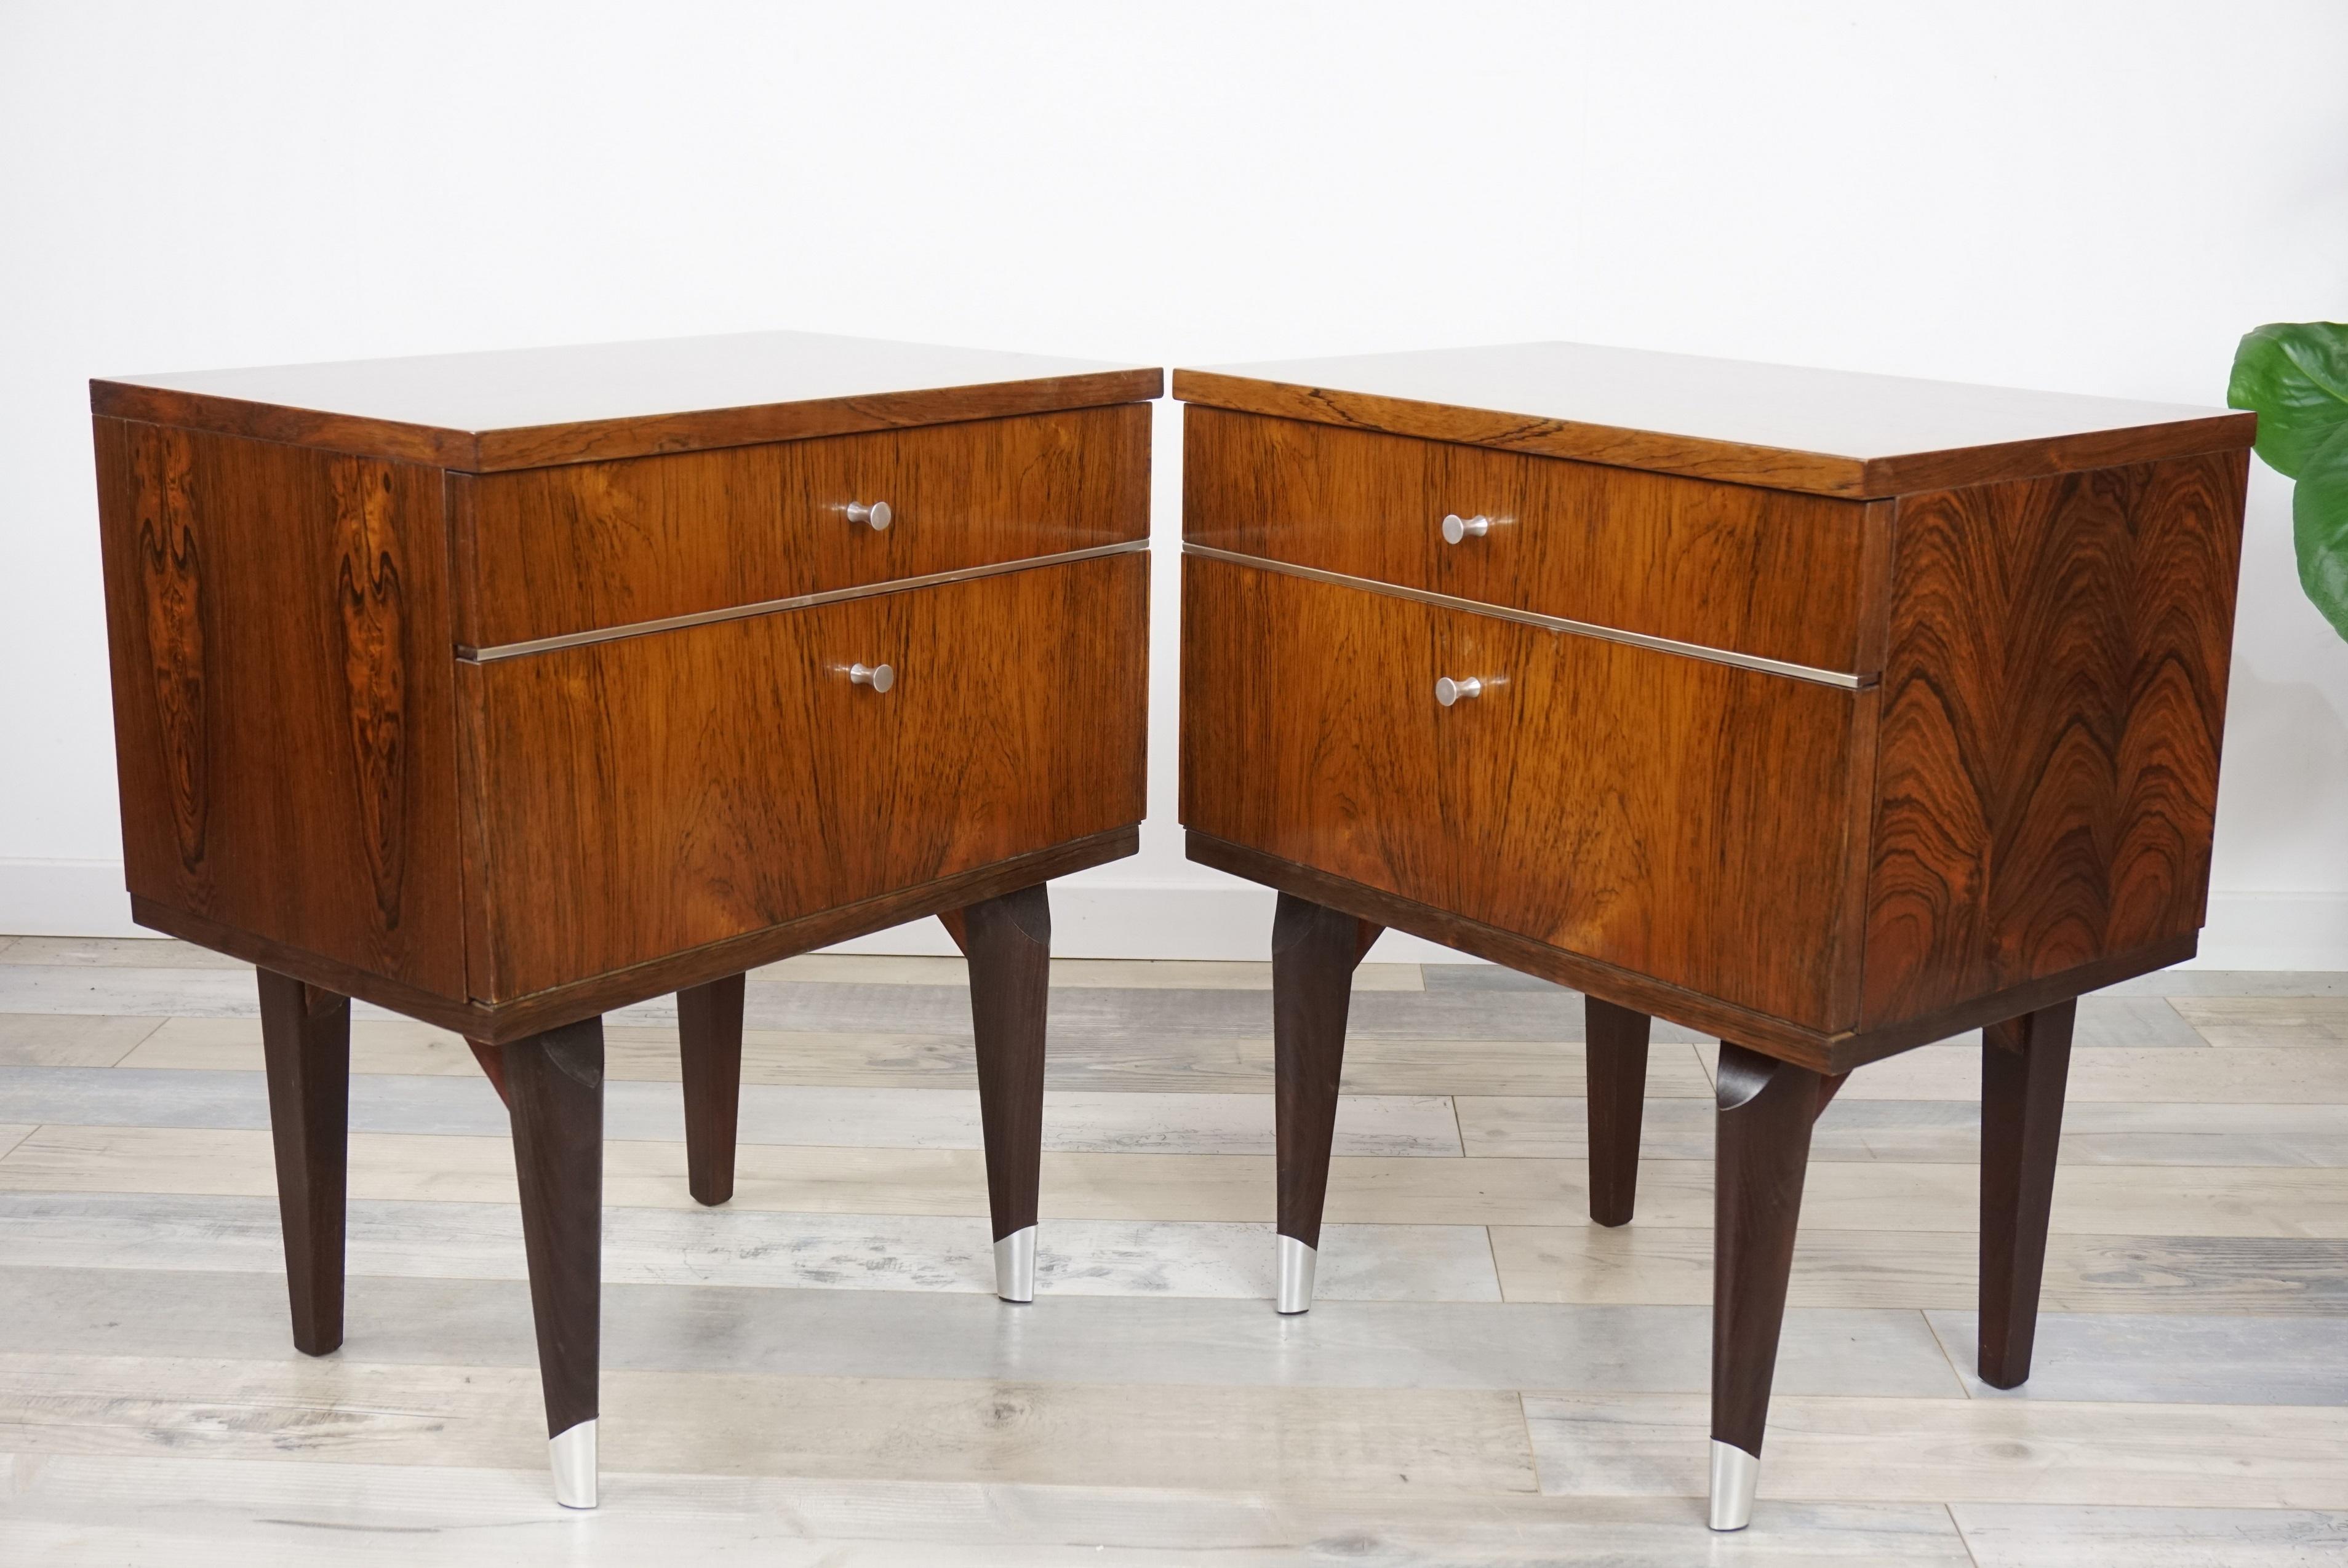 Pair of 1950s design bedside tables in rosewood, chromed handles and chromed edging, square feet chromed finished, one drawer with an opening in front by flap... All in excellent condition!